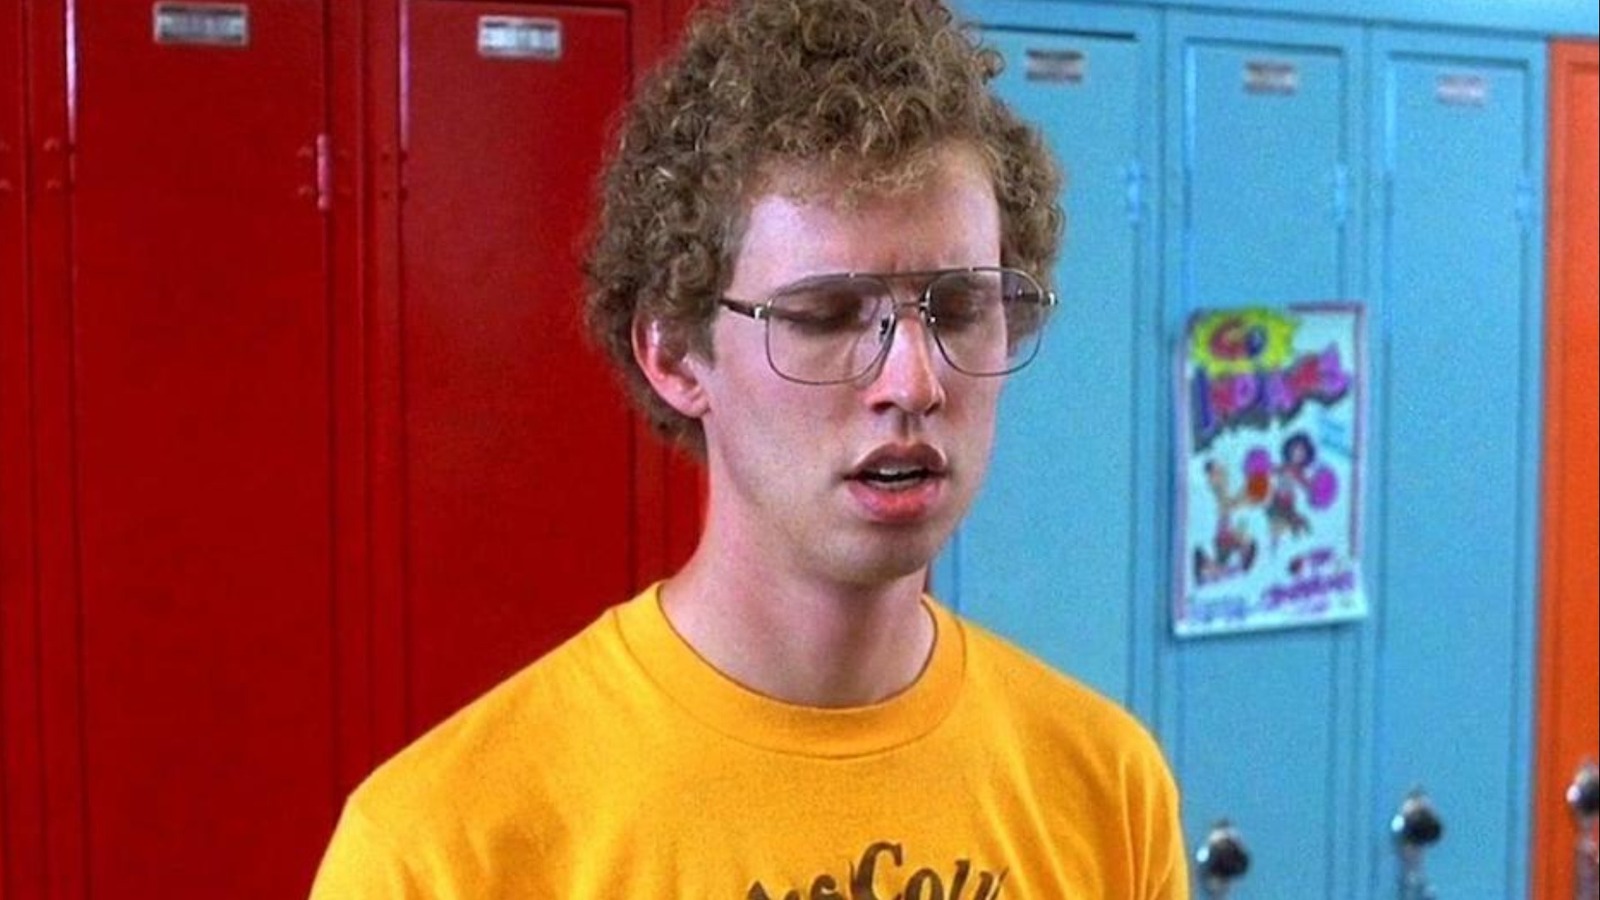 Who Plays Napoleon Dynamite & What Has He Starred In Lately?